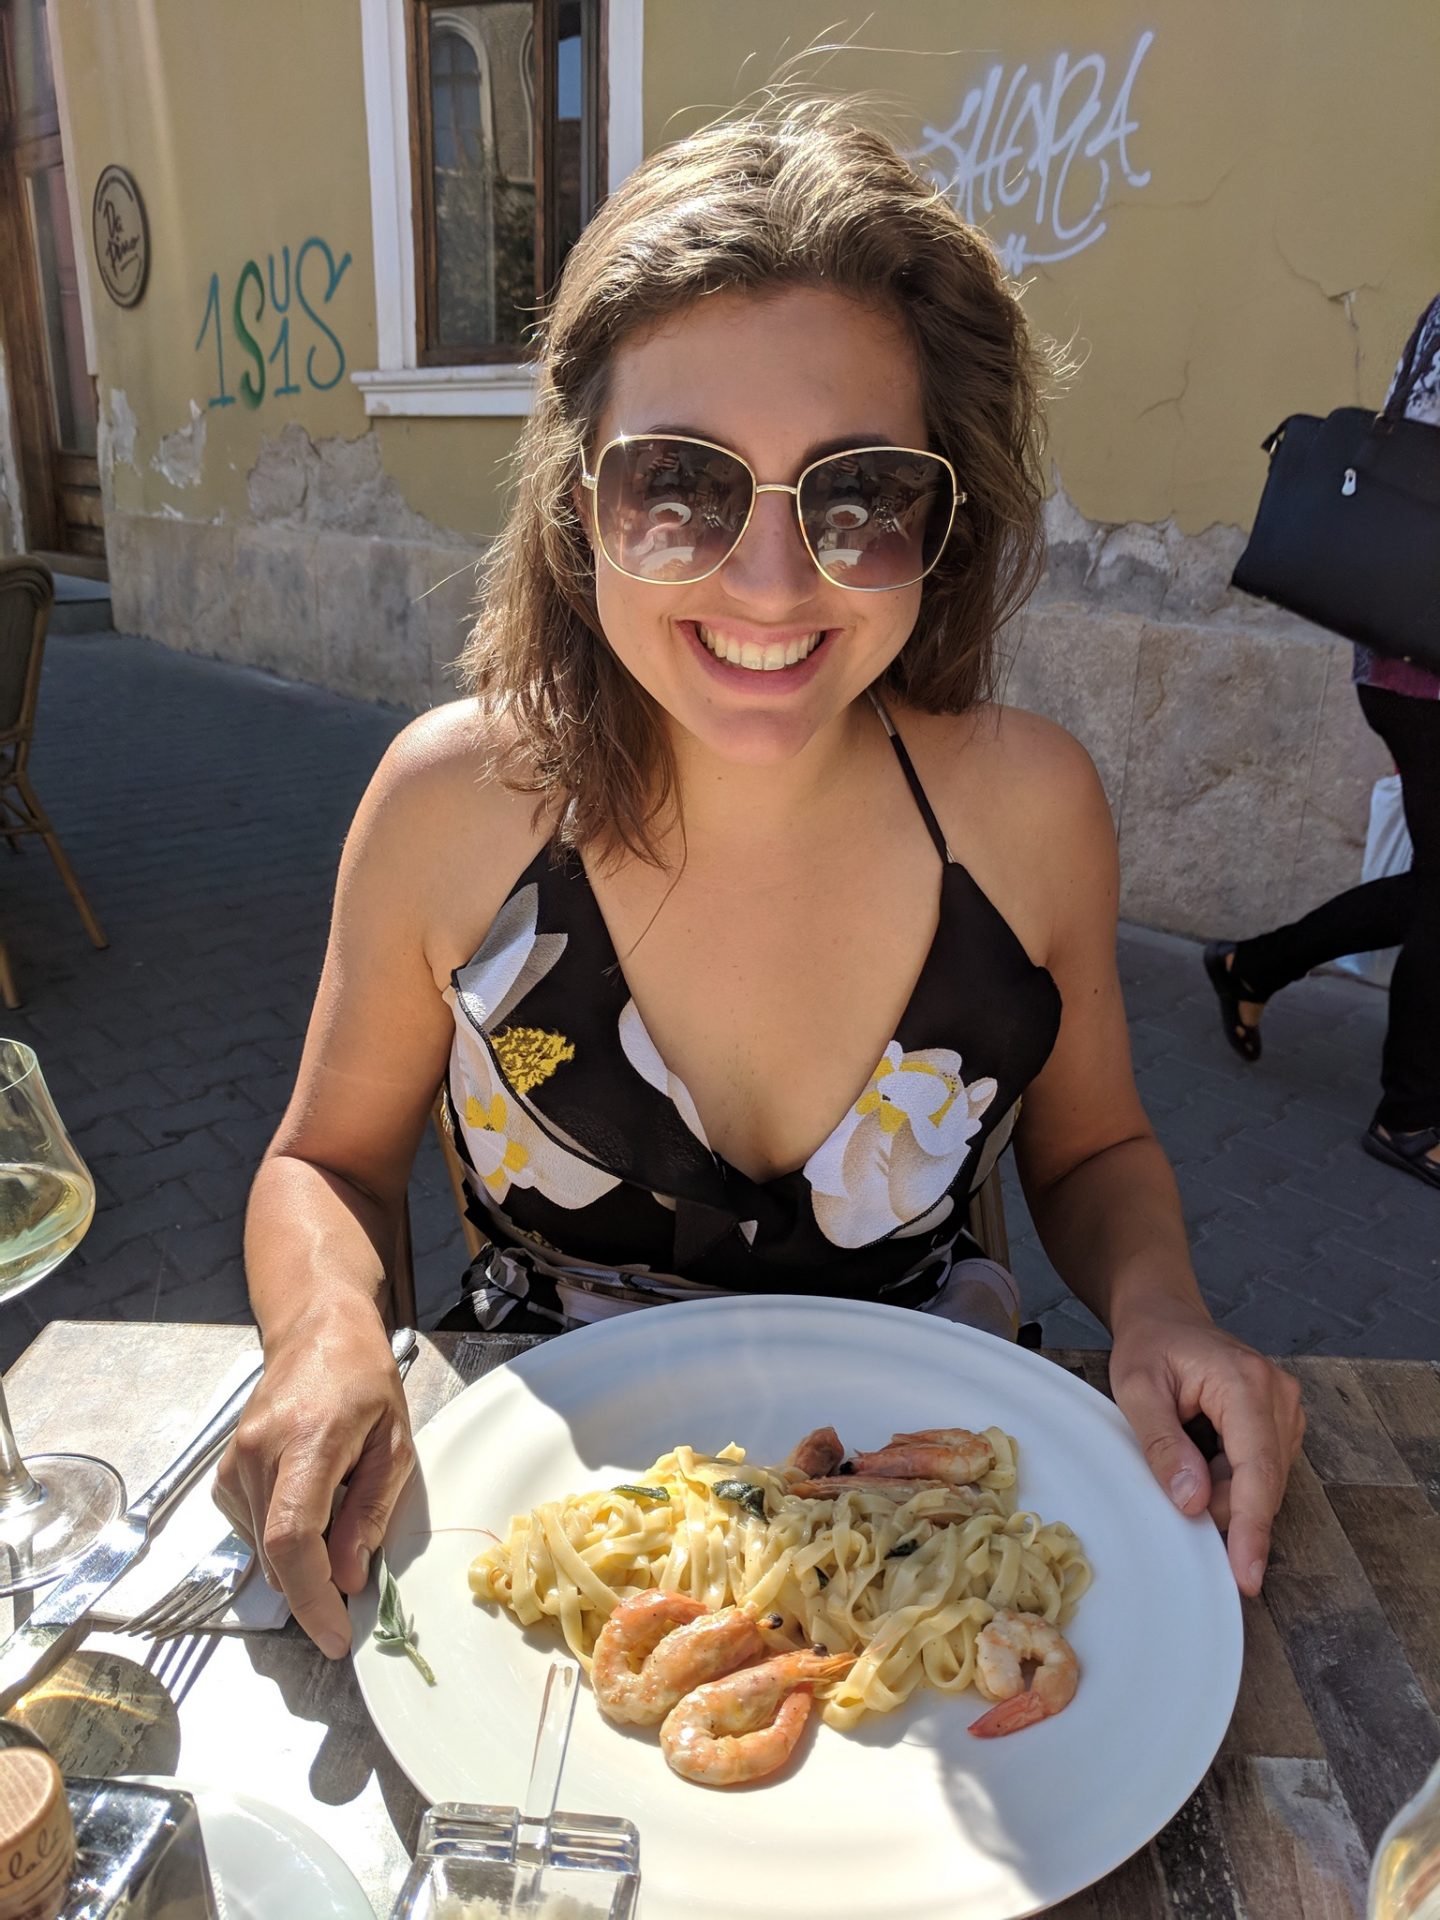 cheap european city break - Nell eating a bowl of pasta in Cluj Napoca. She's wearing sunglasses and looking down at the food whilst smiling